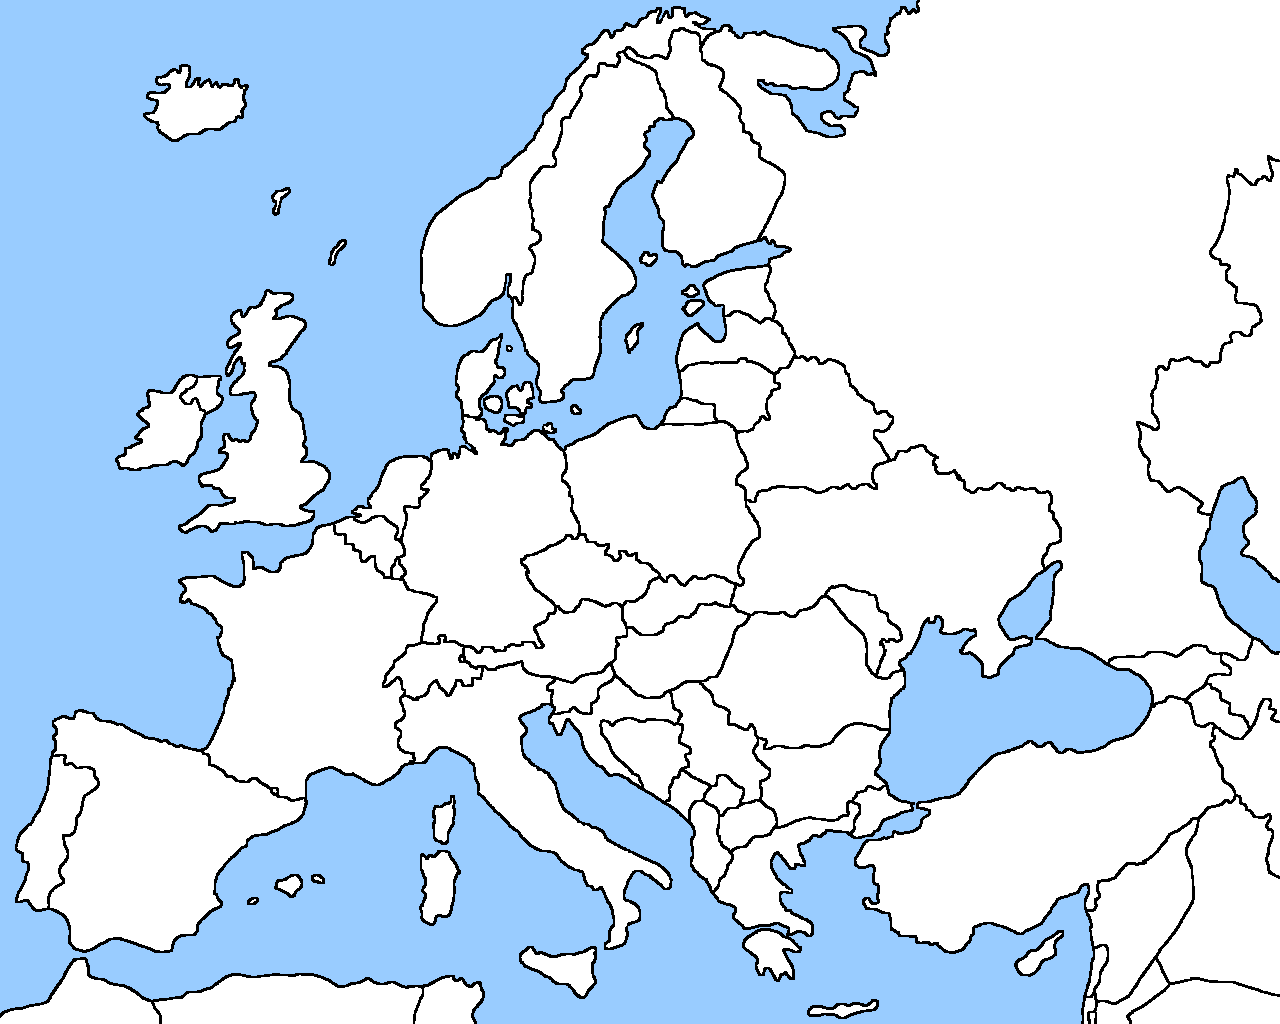 blank map of europe before world war 1